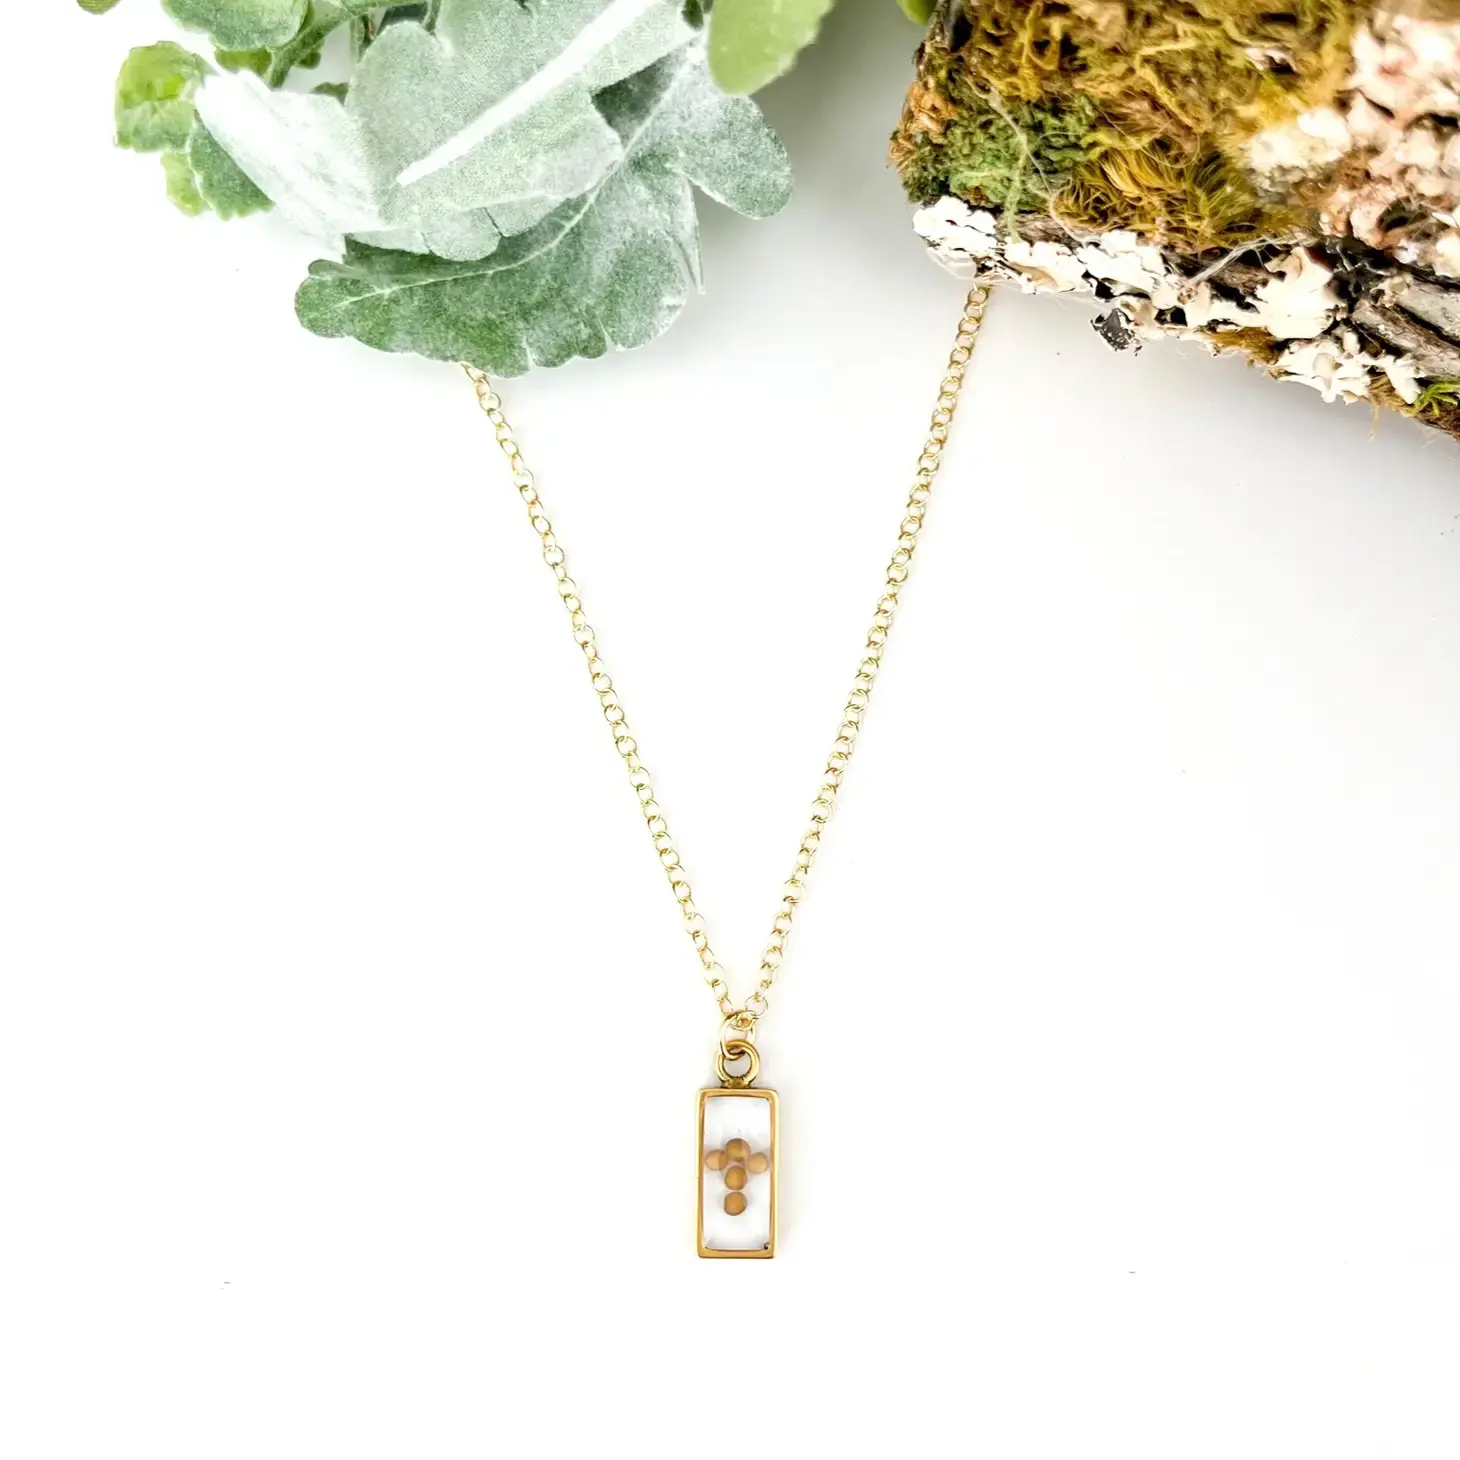 Rectangle Mustard Seed Necklace - Gold